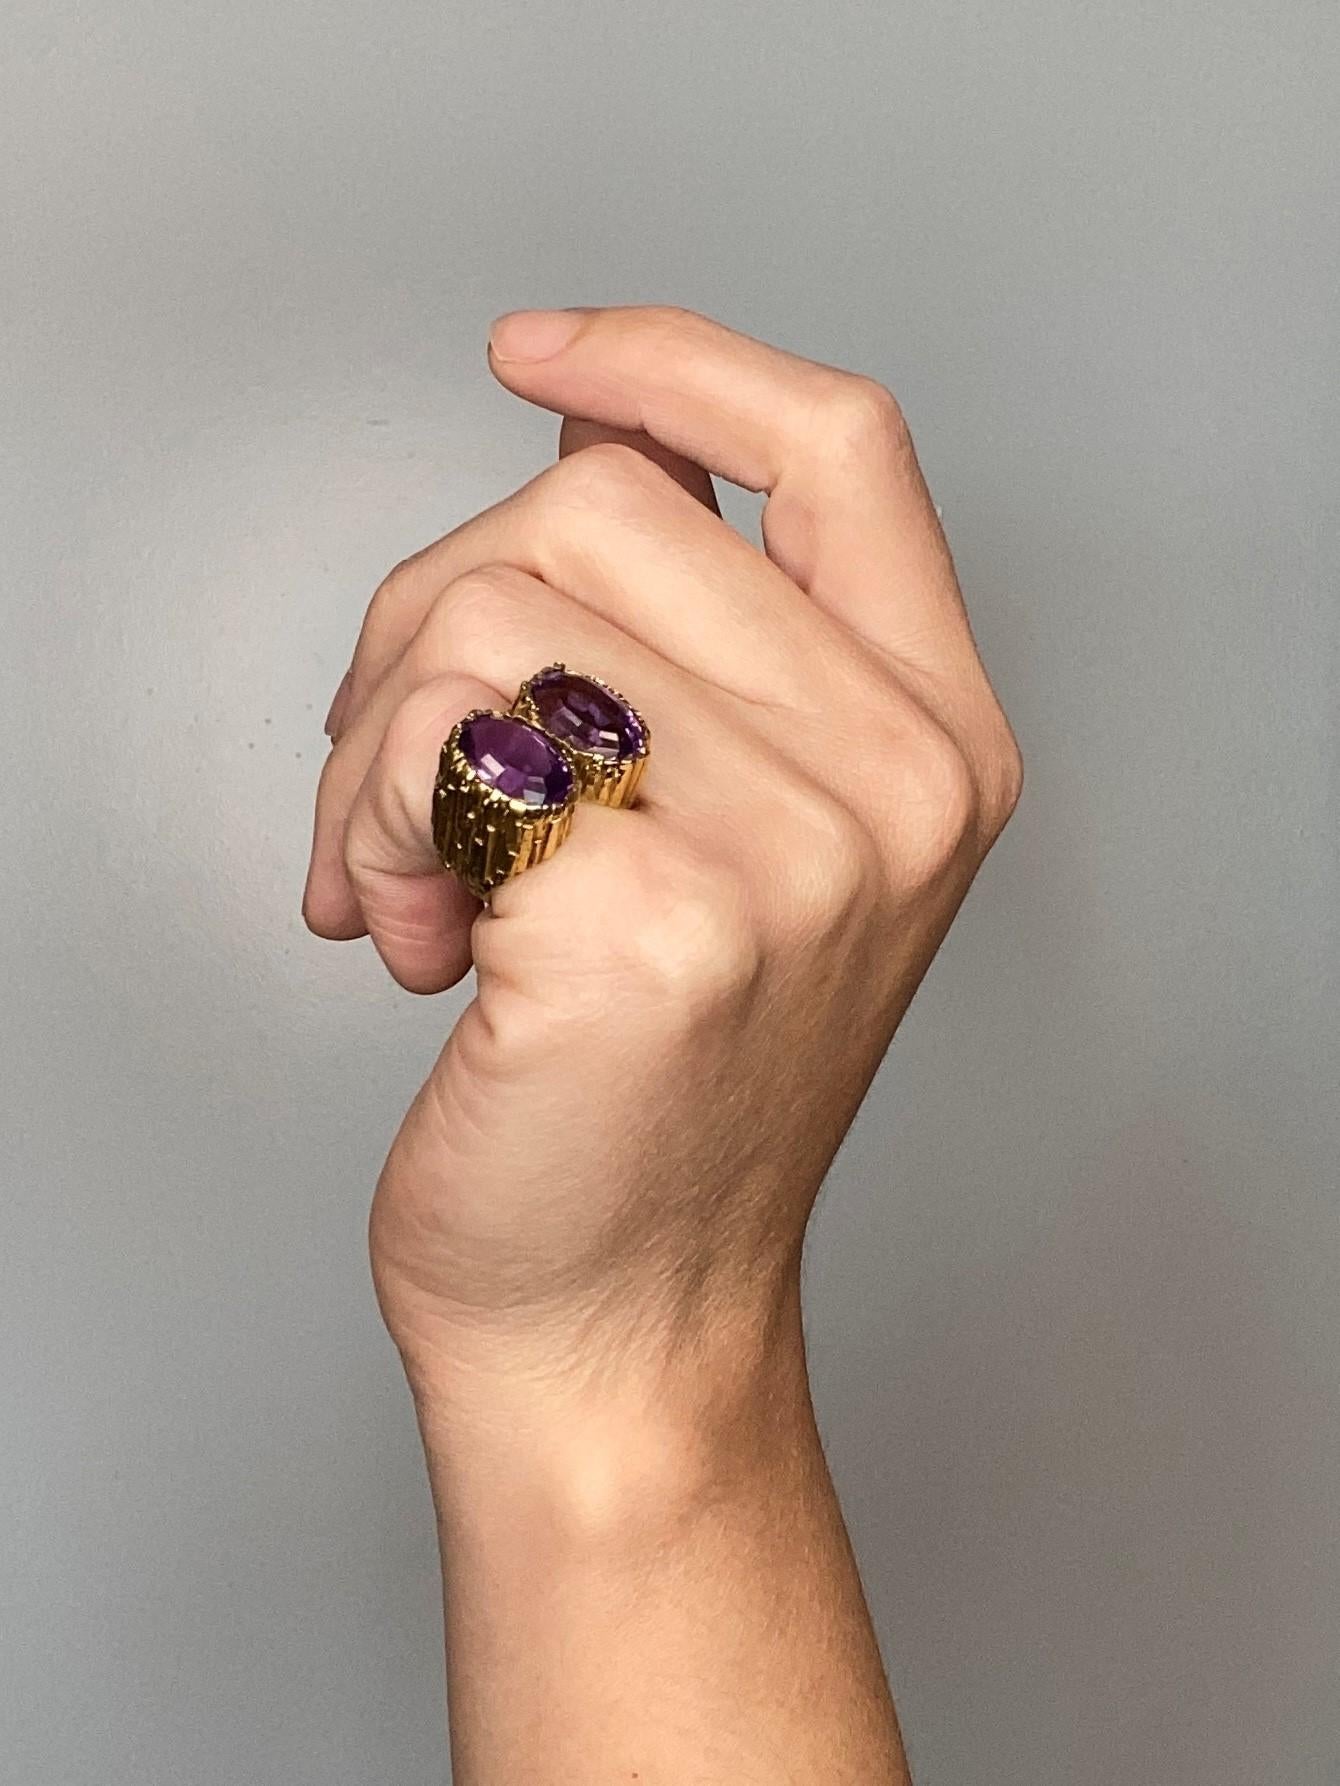 Tiffany Co. Andrew Grima 1972 London Cocktail Ring 18Kt with 16.45 Cts Amethyst In Excellent Condition For Sale In Miami, FL